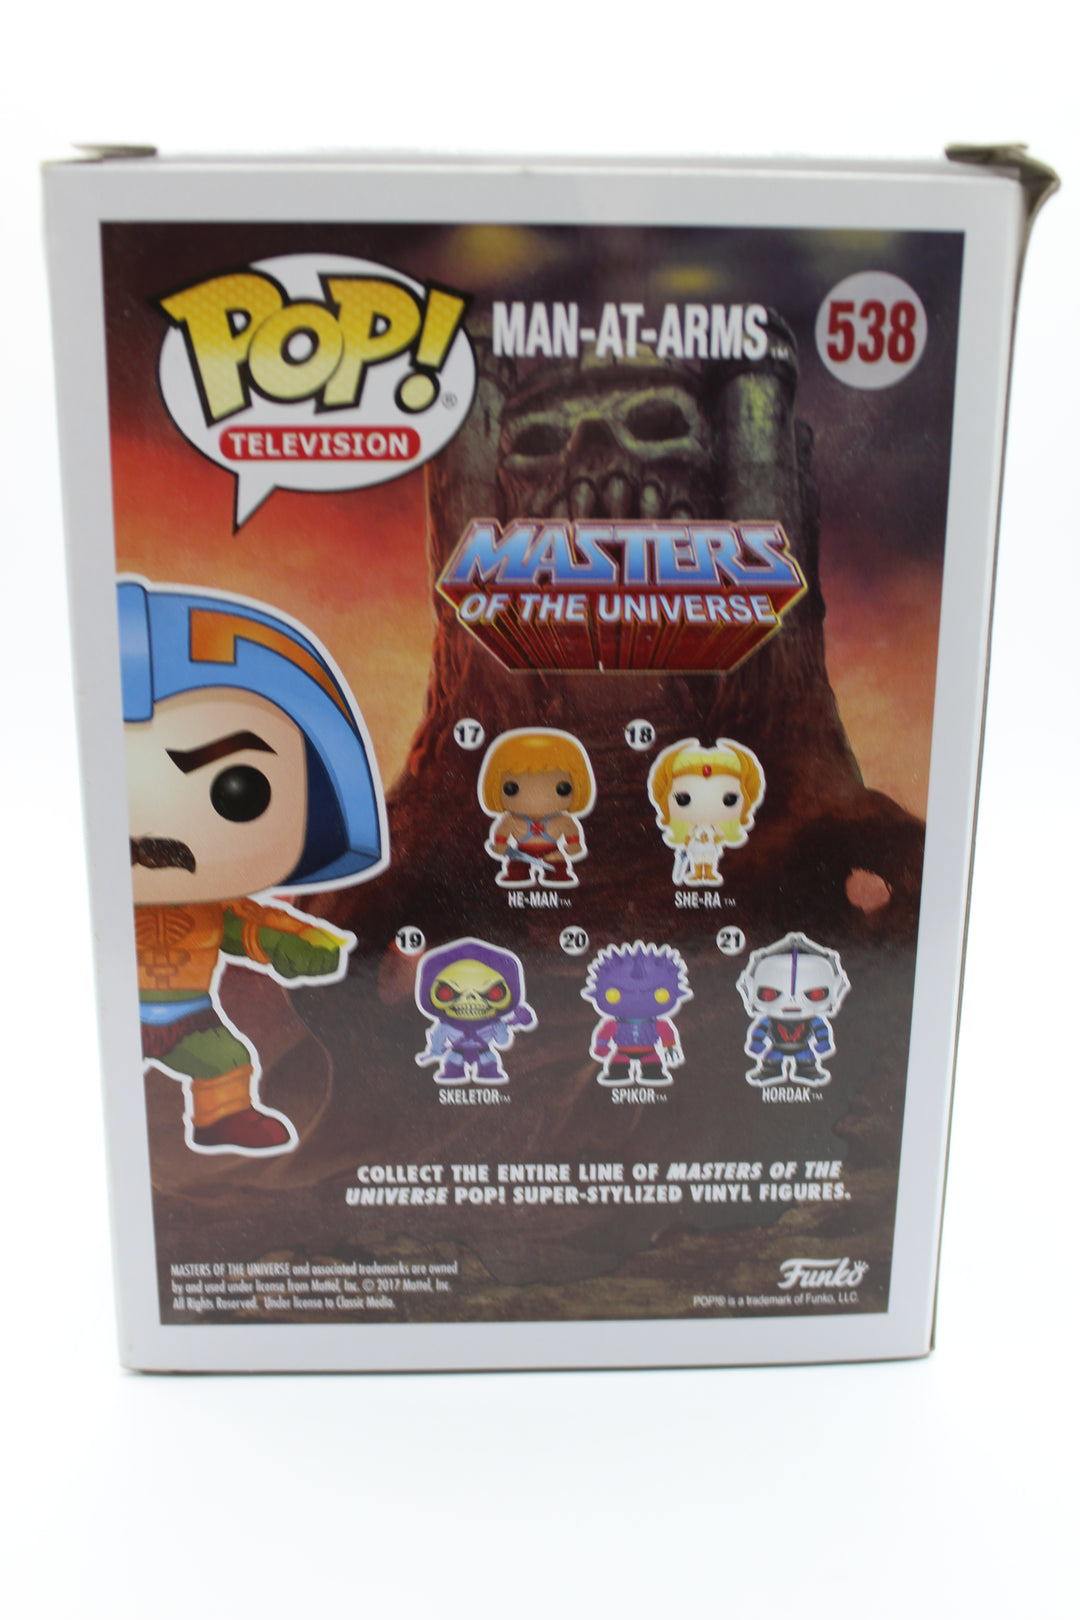 2017 Masters of the Universe Man-At-Arms Funko Pop